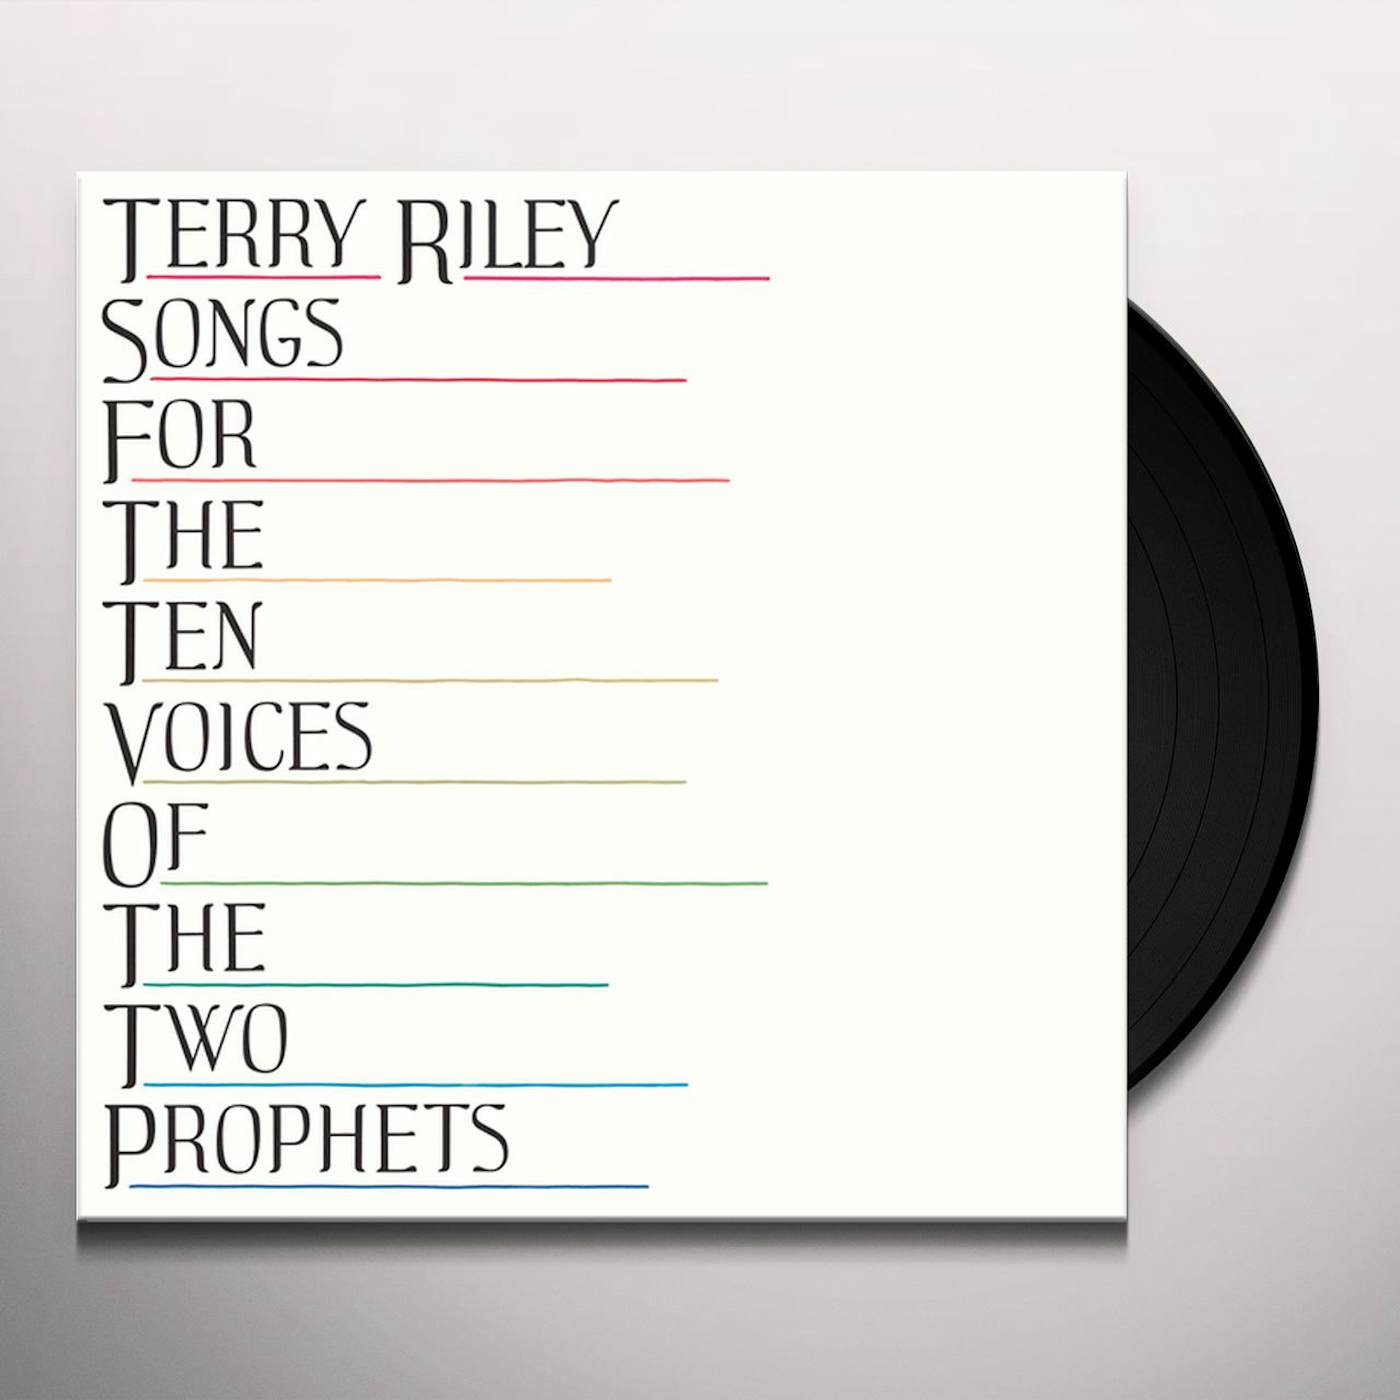 Terry Riley Songs For The Ten Voices Of The Two Prophets Vinyl Record